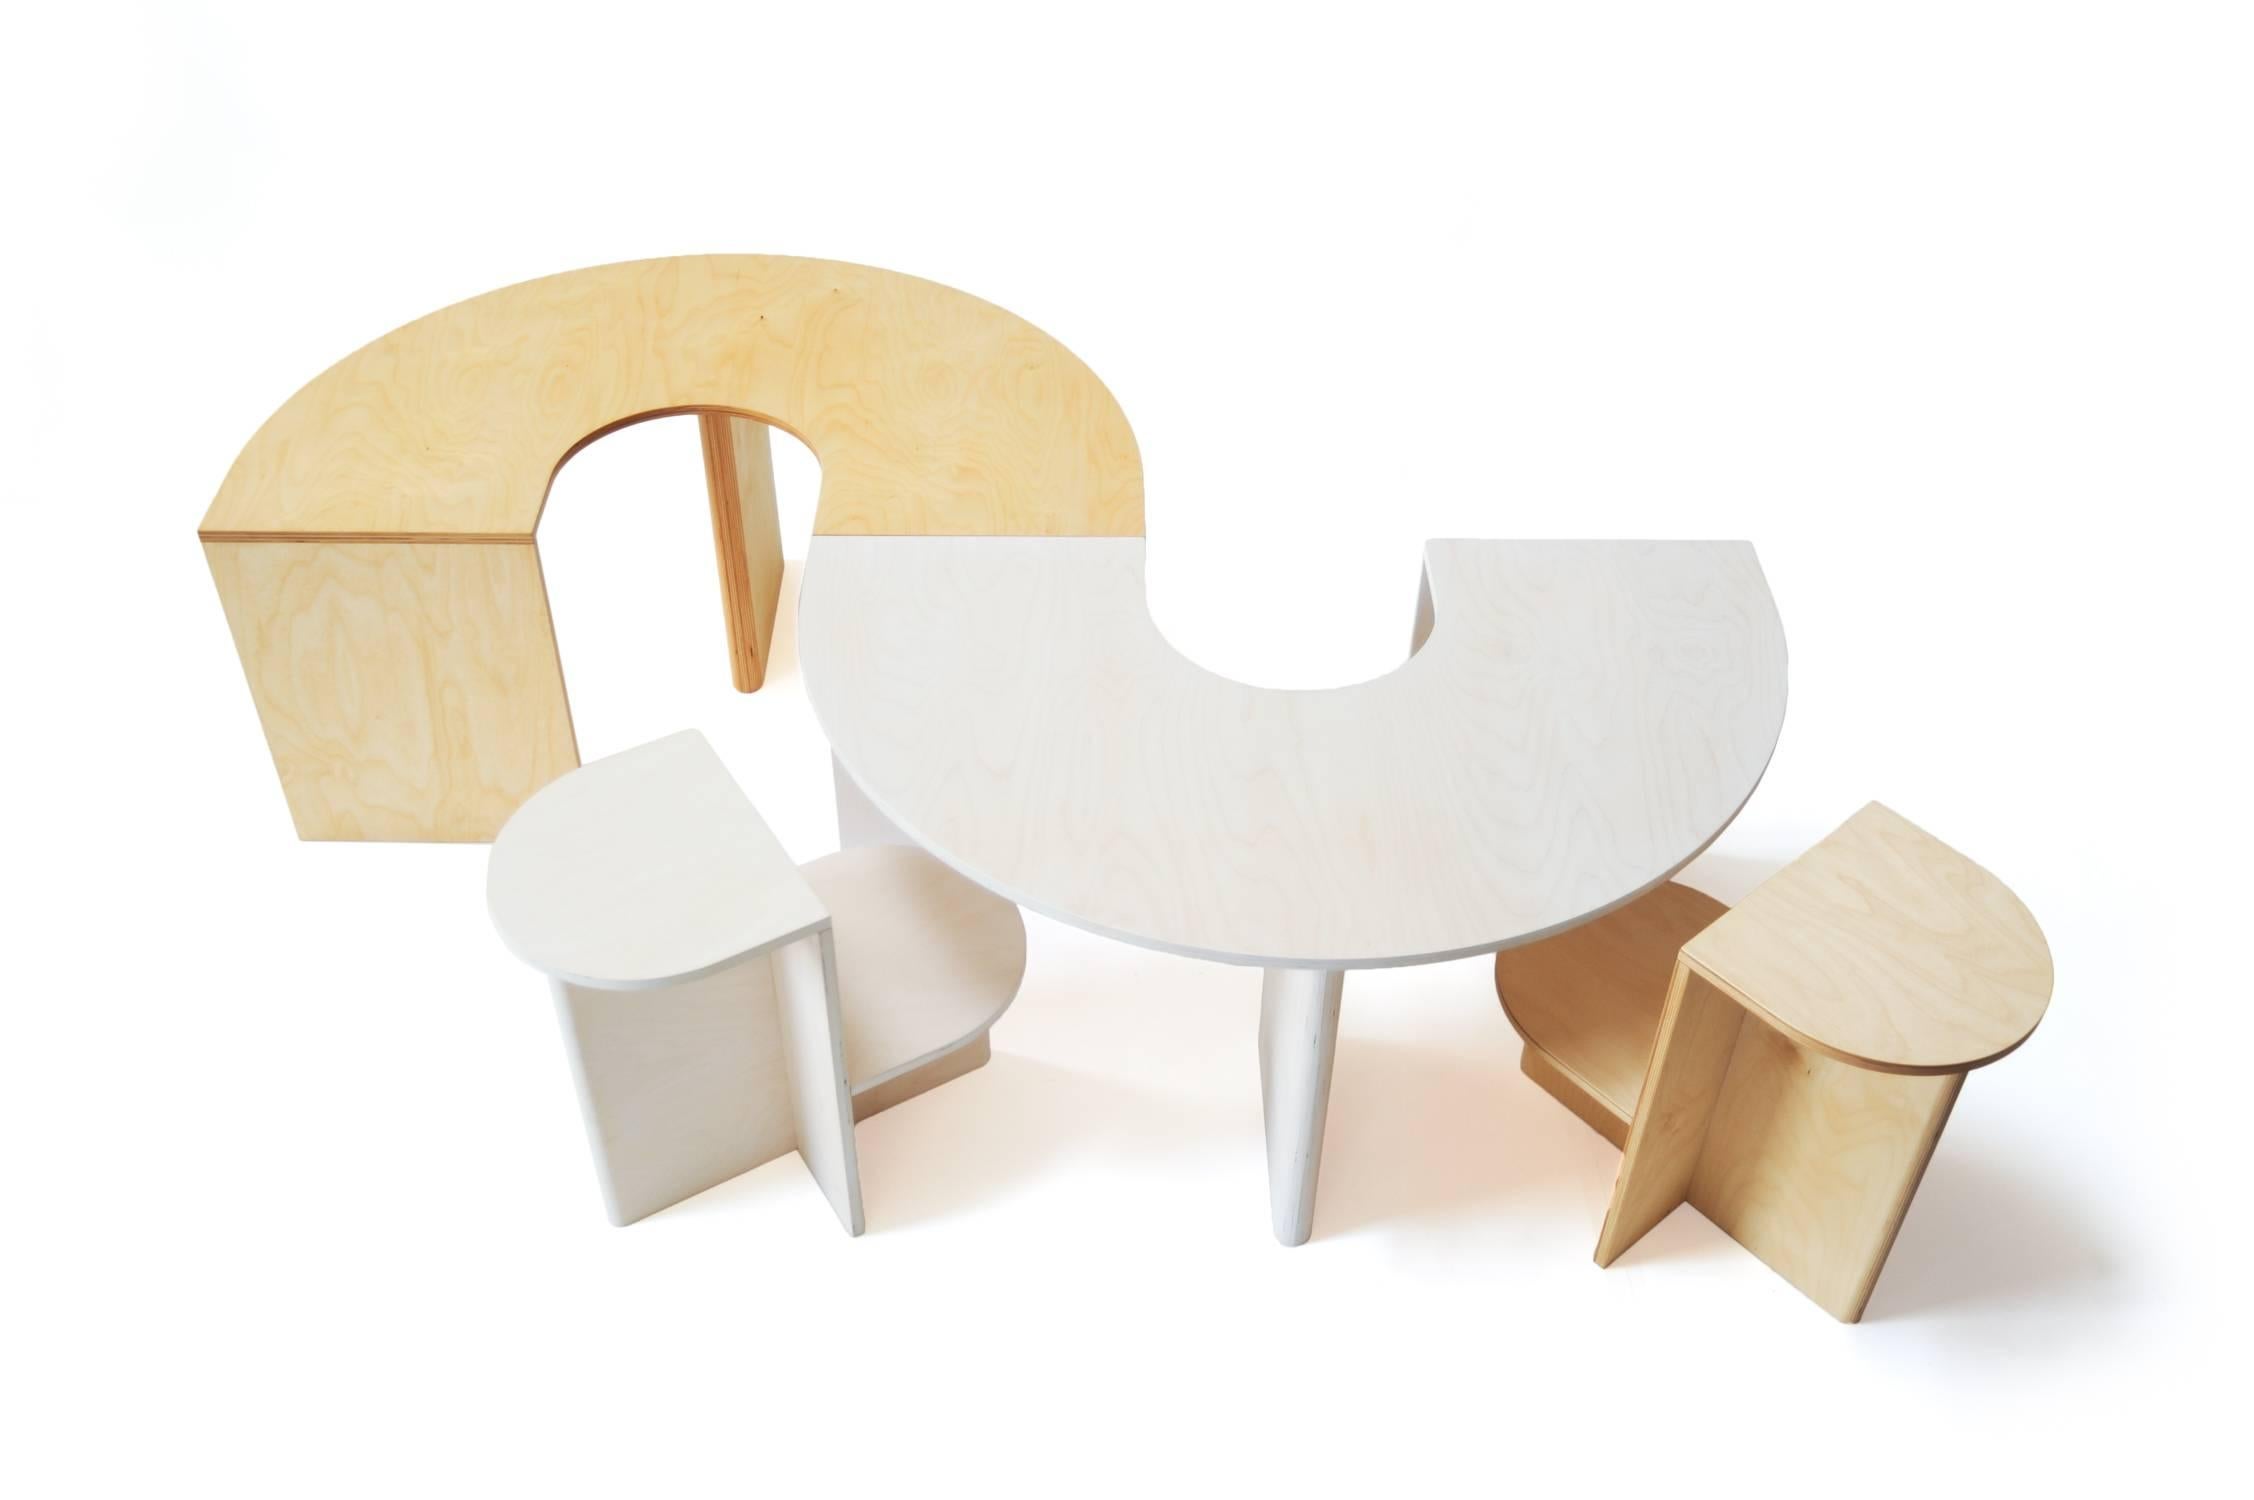 Contemporary Eclipse Chair by Kinder Modern in Birch Plywood, USA, 2017 For Sale